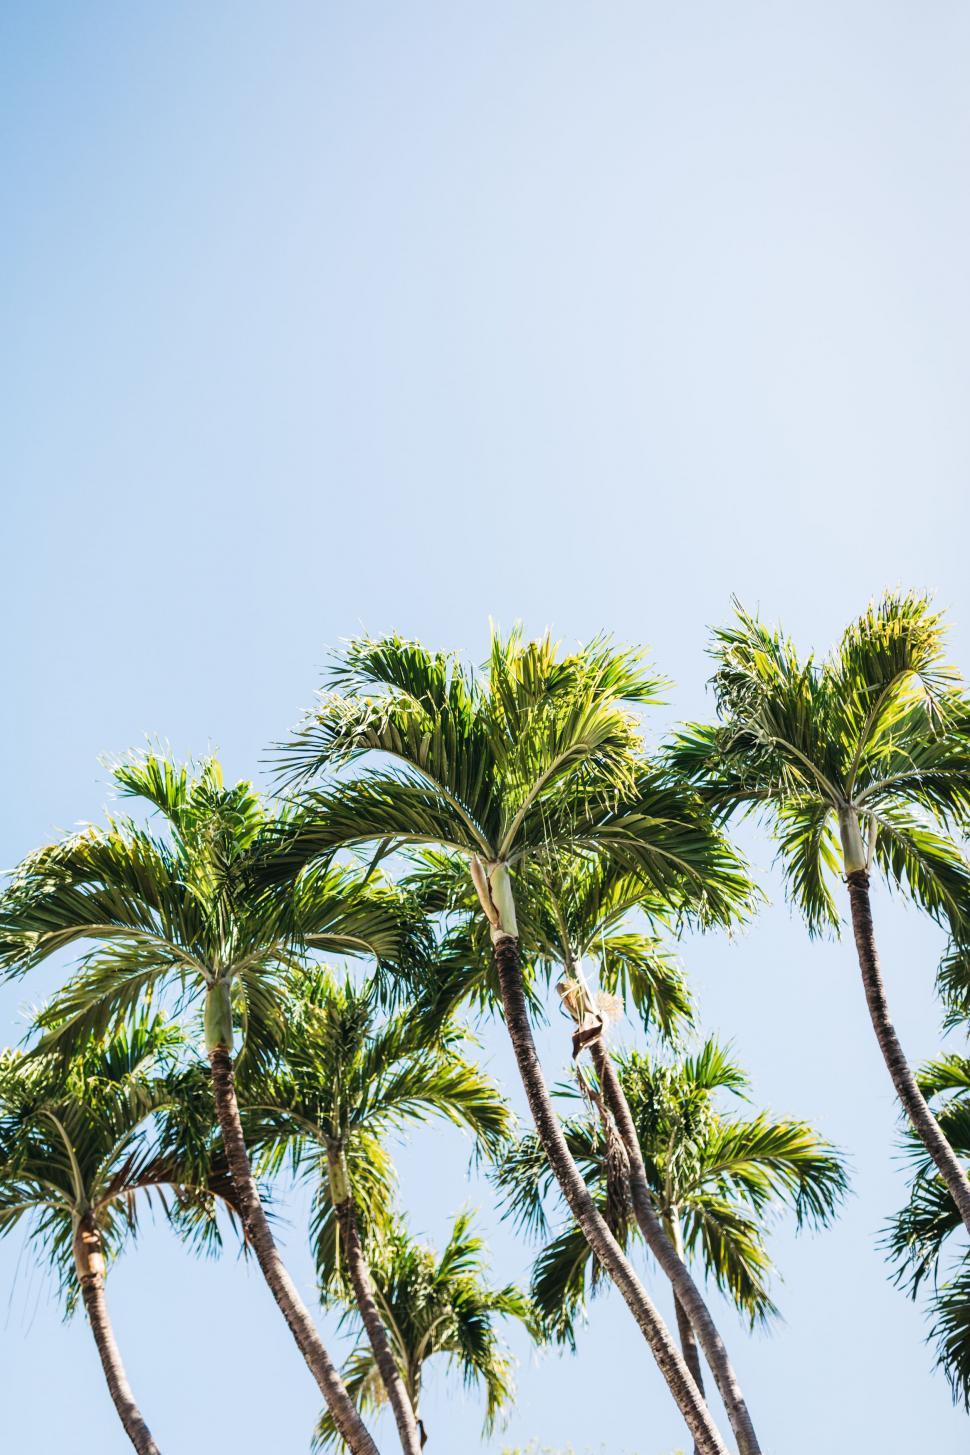 Free Image of Group of Palm Trees Swaying in the Wind 